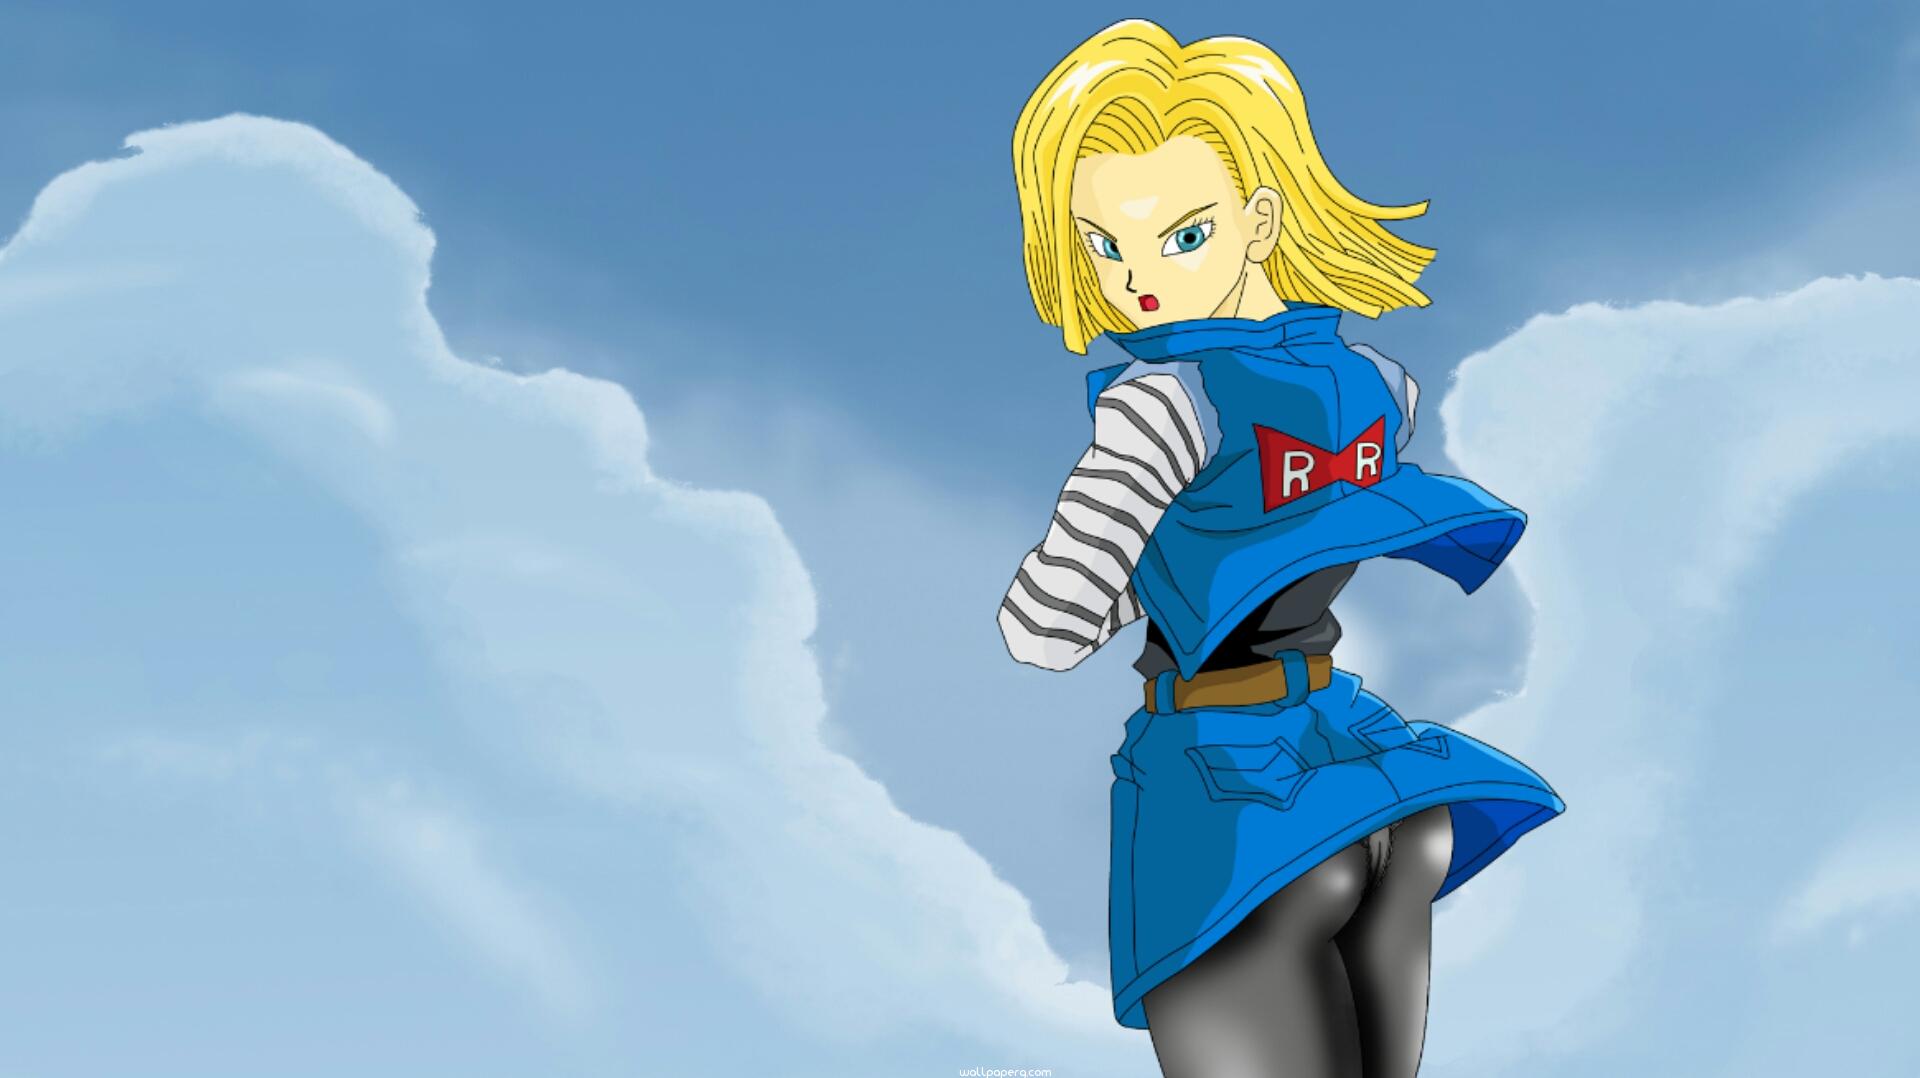 Download "Android 18 wallpaper" wallpaper for mobile cell phone. 